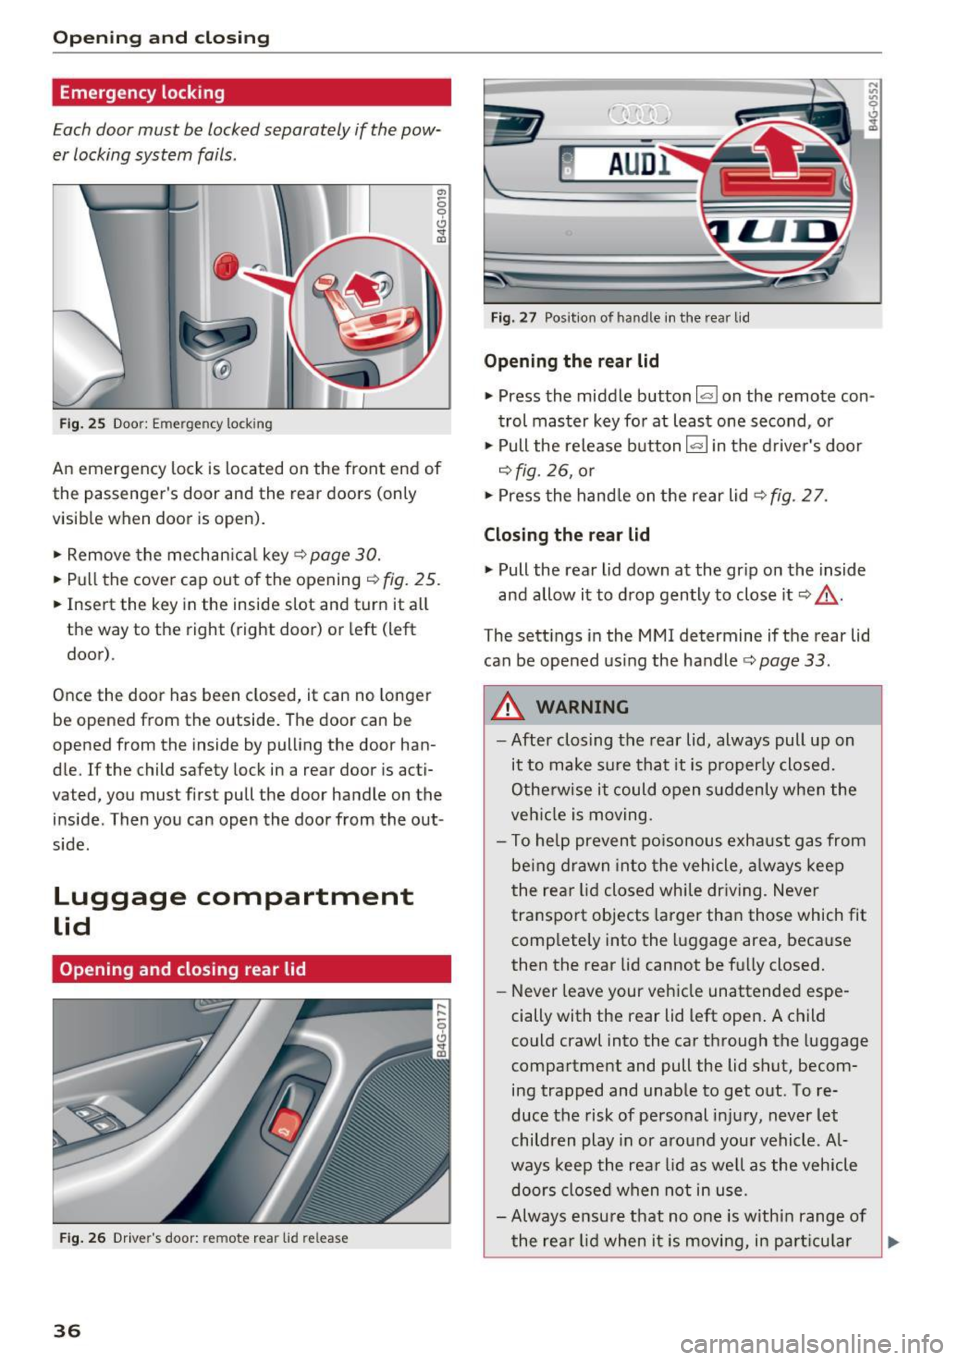 AUDI A6 2016 Owners Guide Opening  and clo sin g 
Emergency  locking 
Each door  must  be locked separately  if  the pow­
er locking  system  fails. 
Fig . 25 Door: Emergency  lock ing 
.,, 
0 9 Cl <t m 
An emergency  lock  i